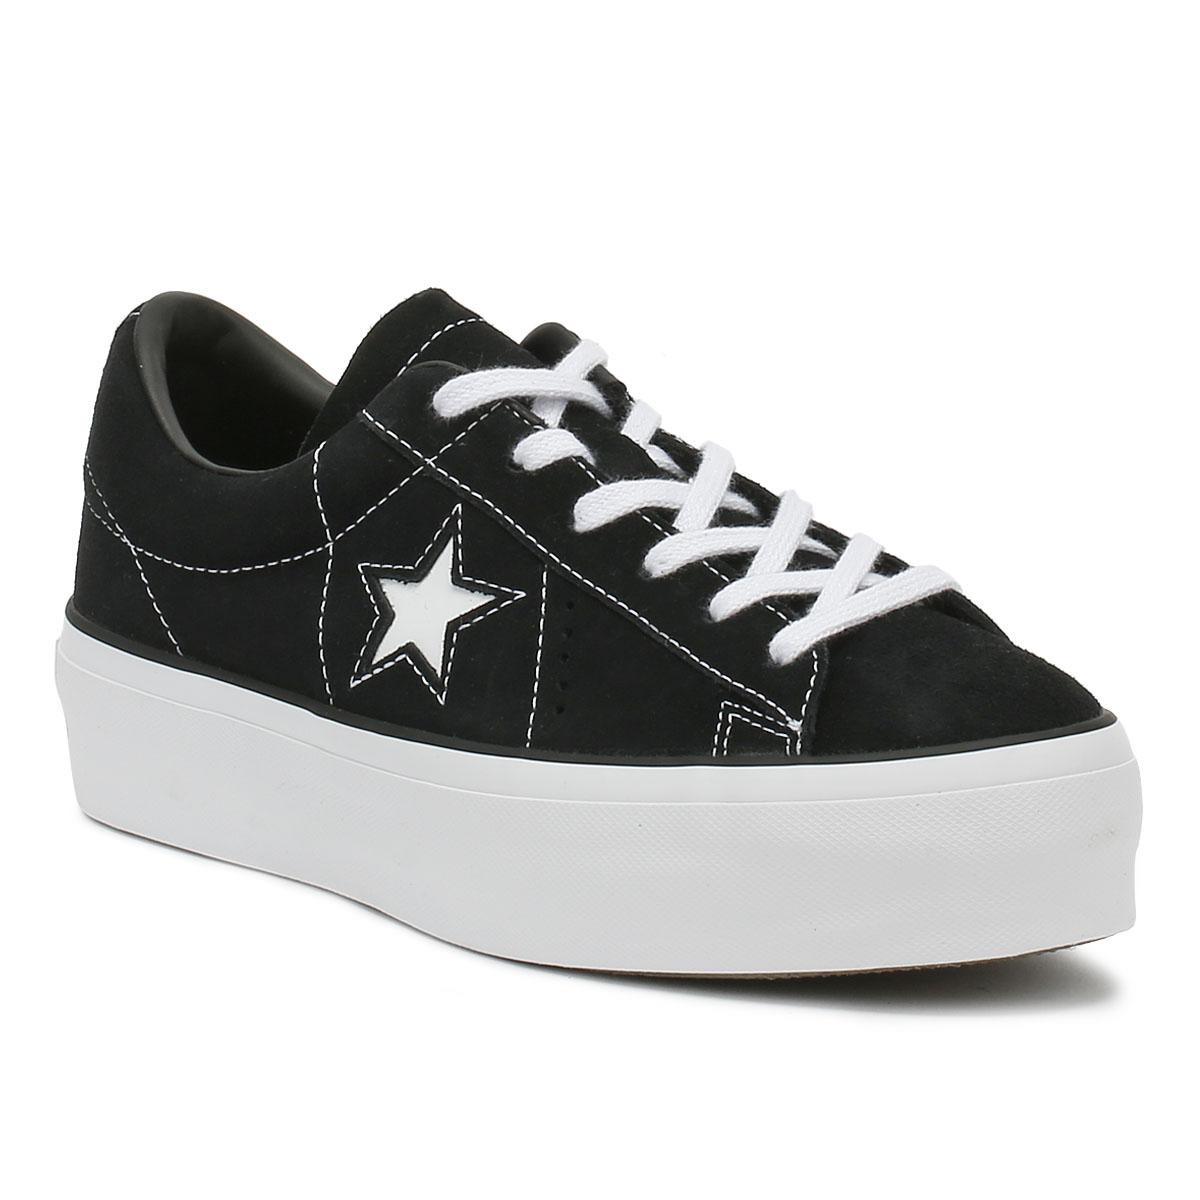 converse one star ox trainers in black